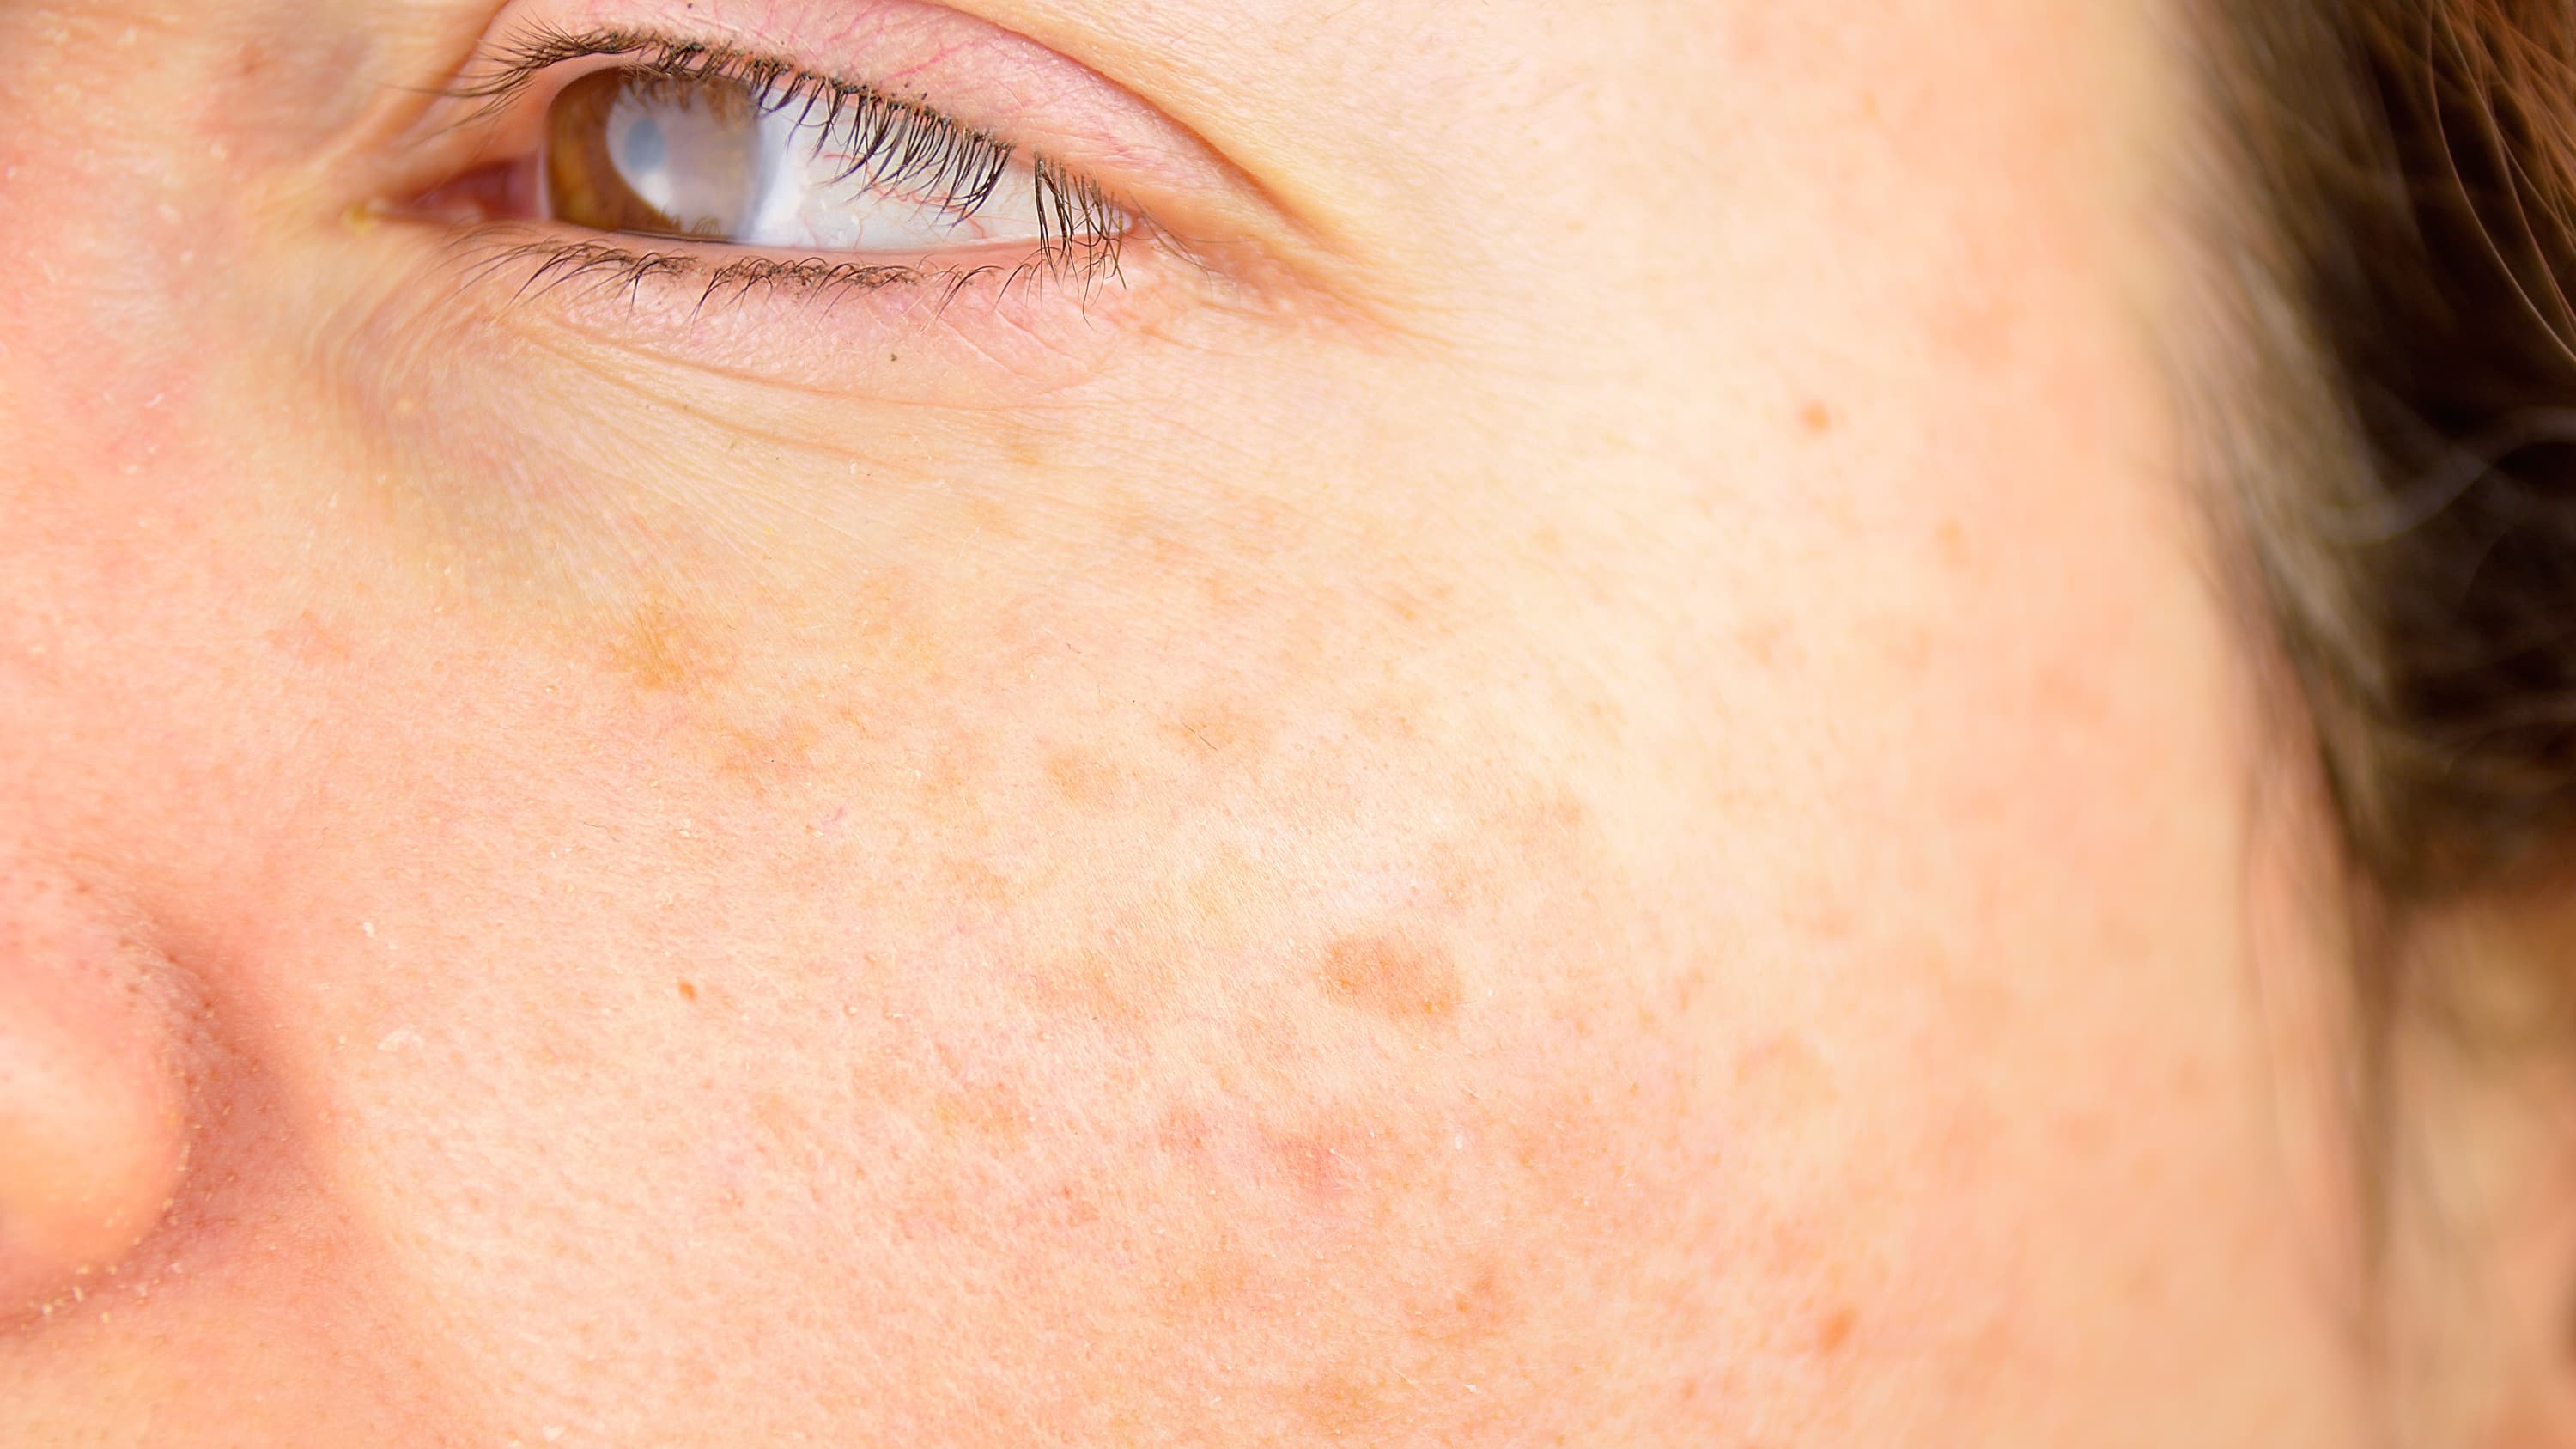 woman cheek with liver spot causes by sun damage